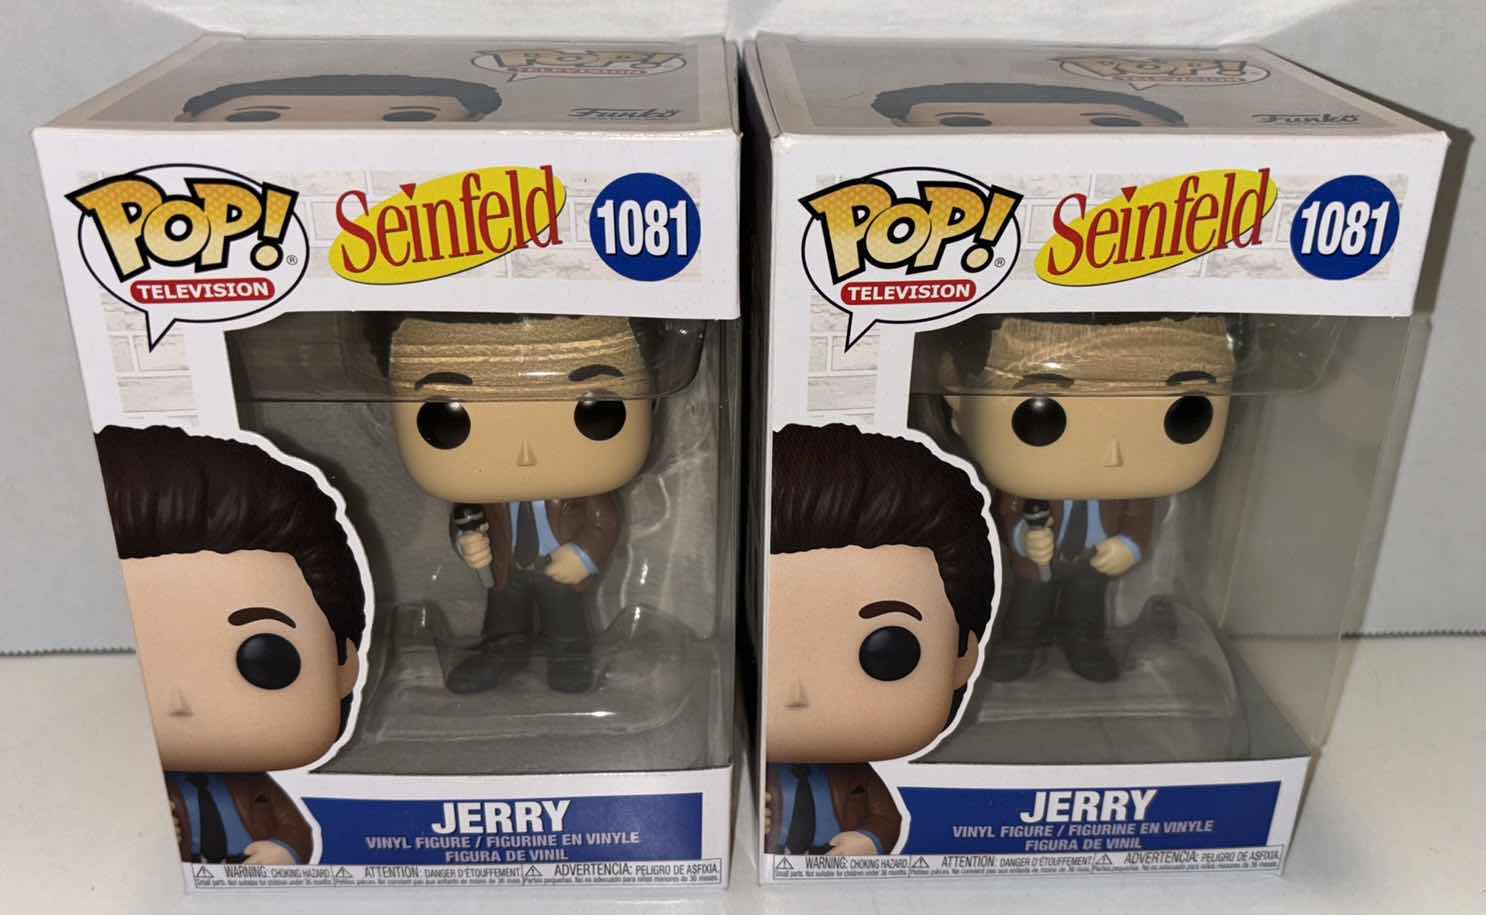 Photo 1 of NEW FUNKO POP! TELEVISION 2-PACK SEINFELD VINYL FIGURE, #1081 JERRY (DOING STAND-UP)